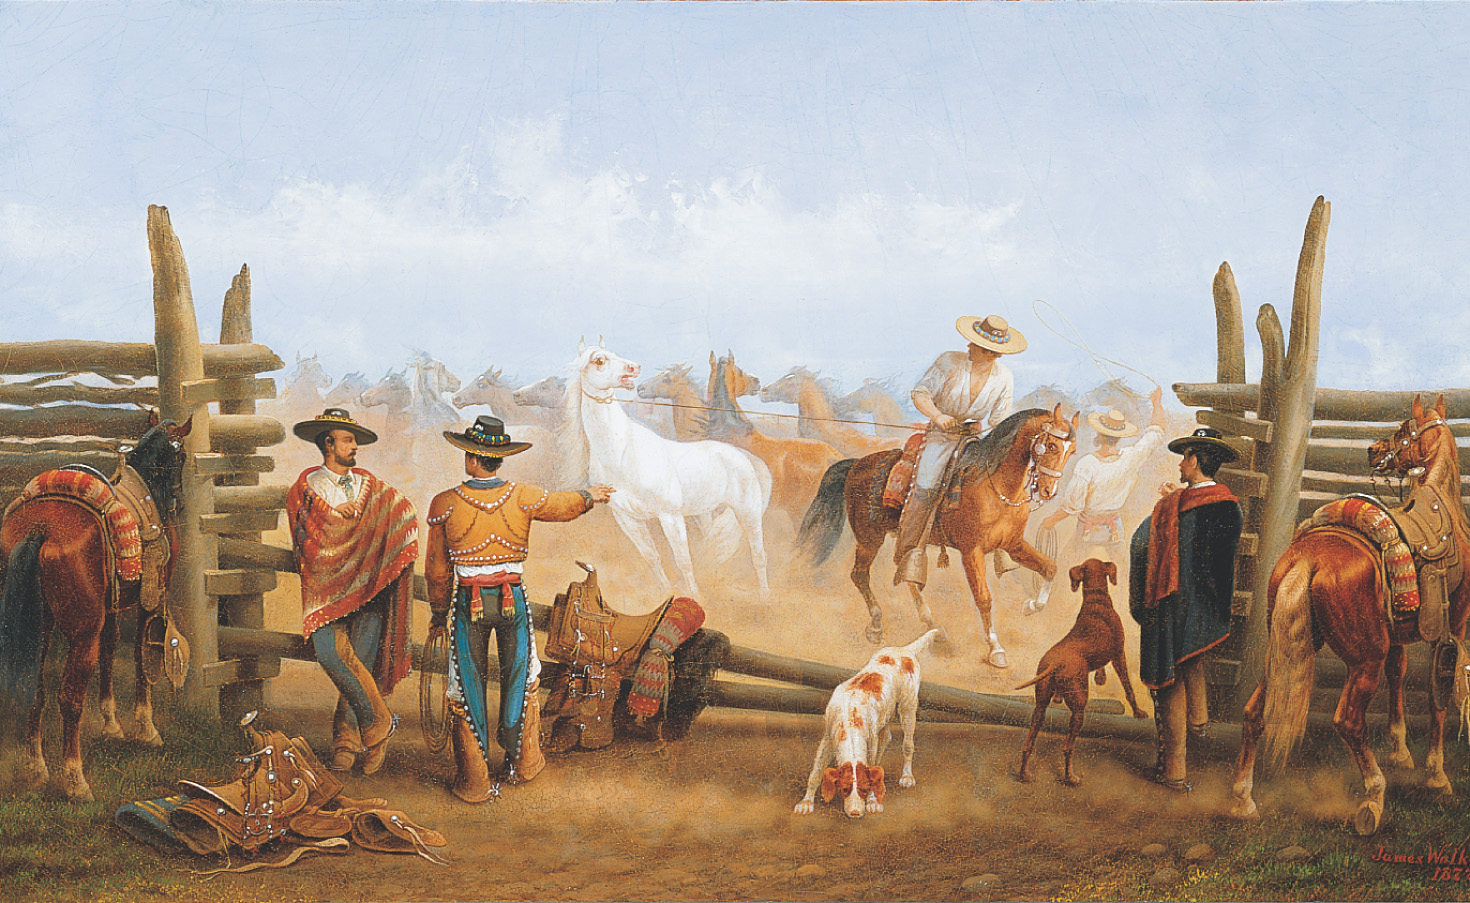 A painting: men wearing wide-brimmed hats, chaps and spurs round up horses in a corral.